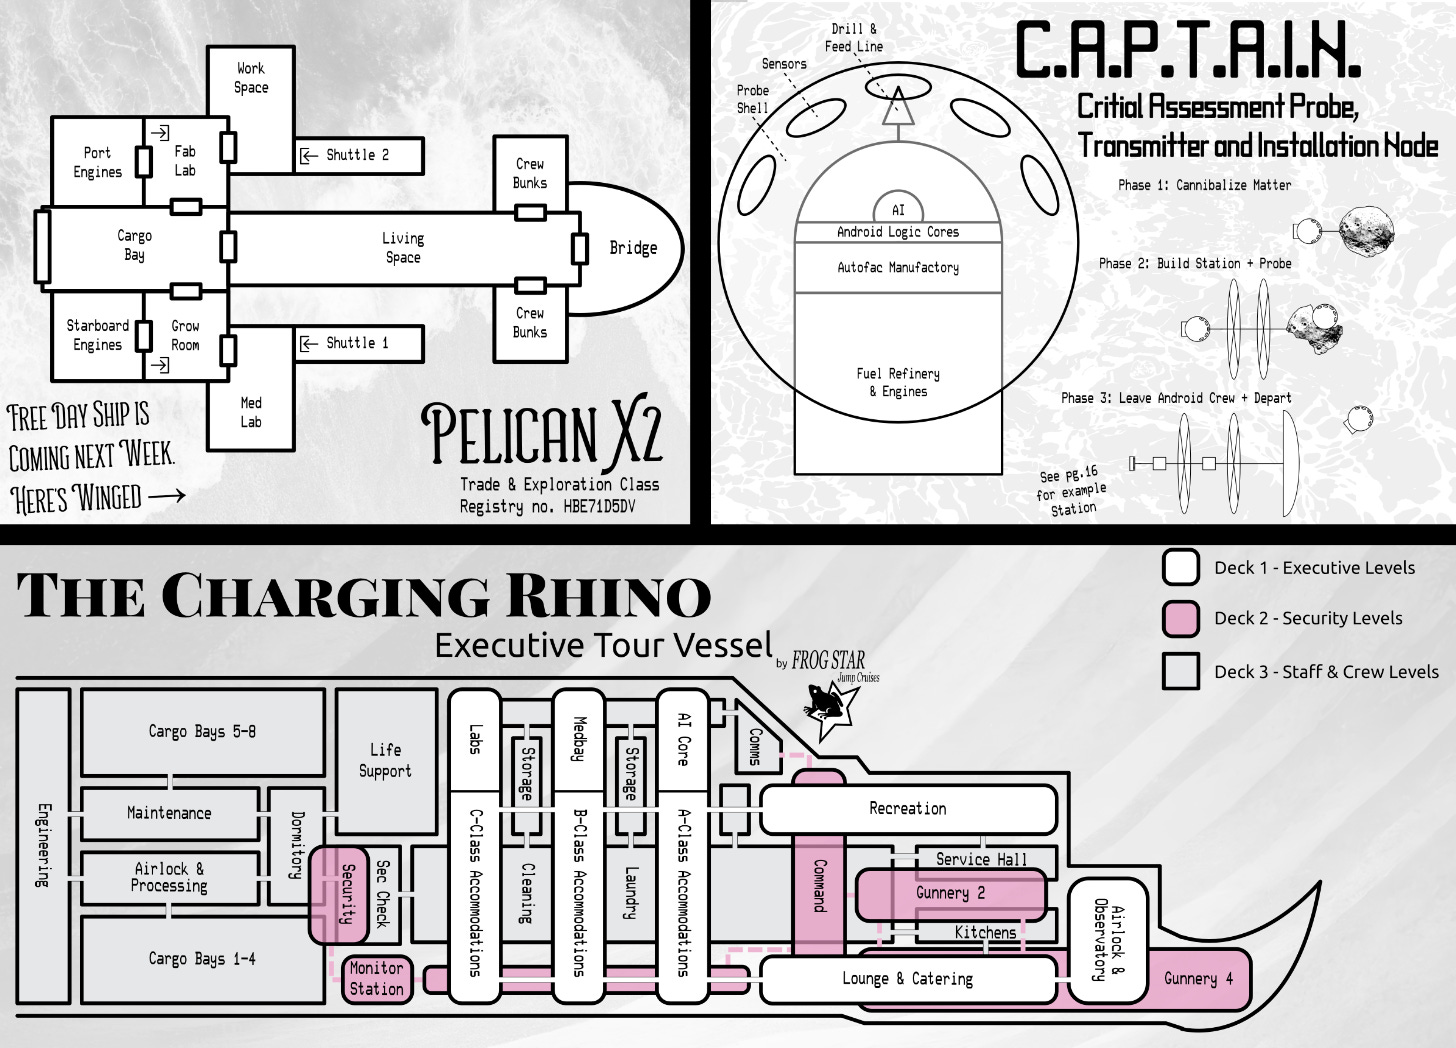 Three images from the spaceship deckplan zine. One is a medium-sized ship, one is a Van Neumann probe that builds space stations, the last is an "executive tour vessel" shaped a bit like a Rhino.